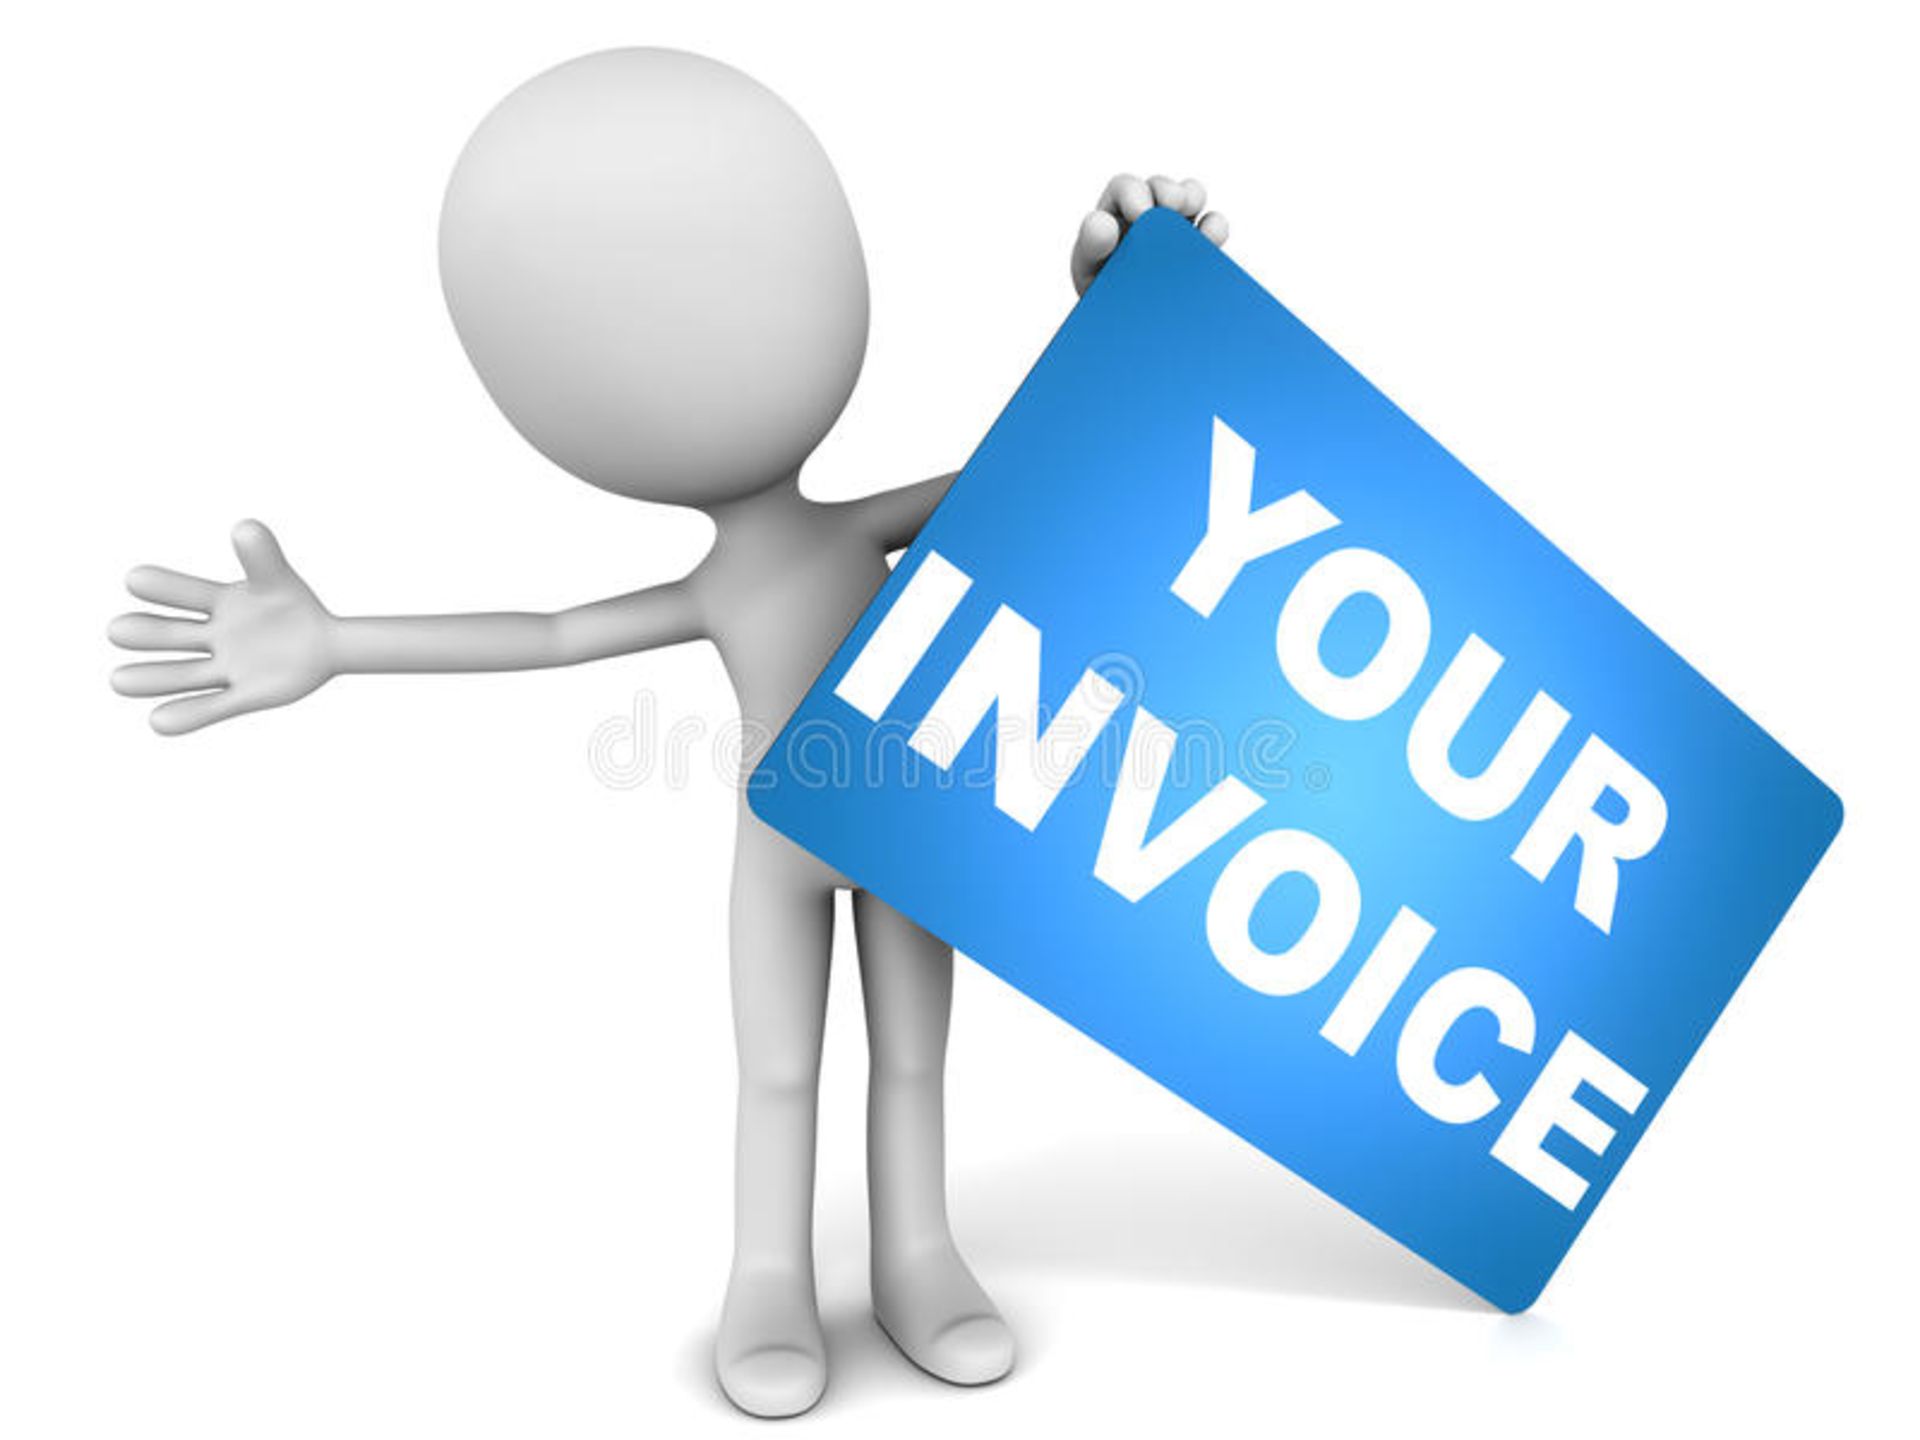 YOUR INVOICE